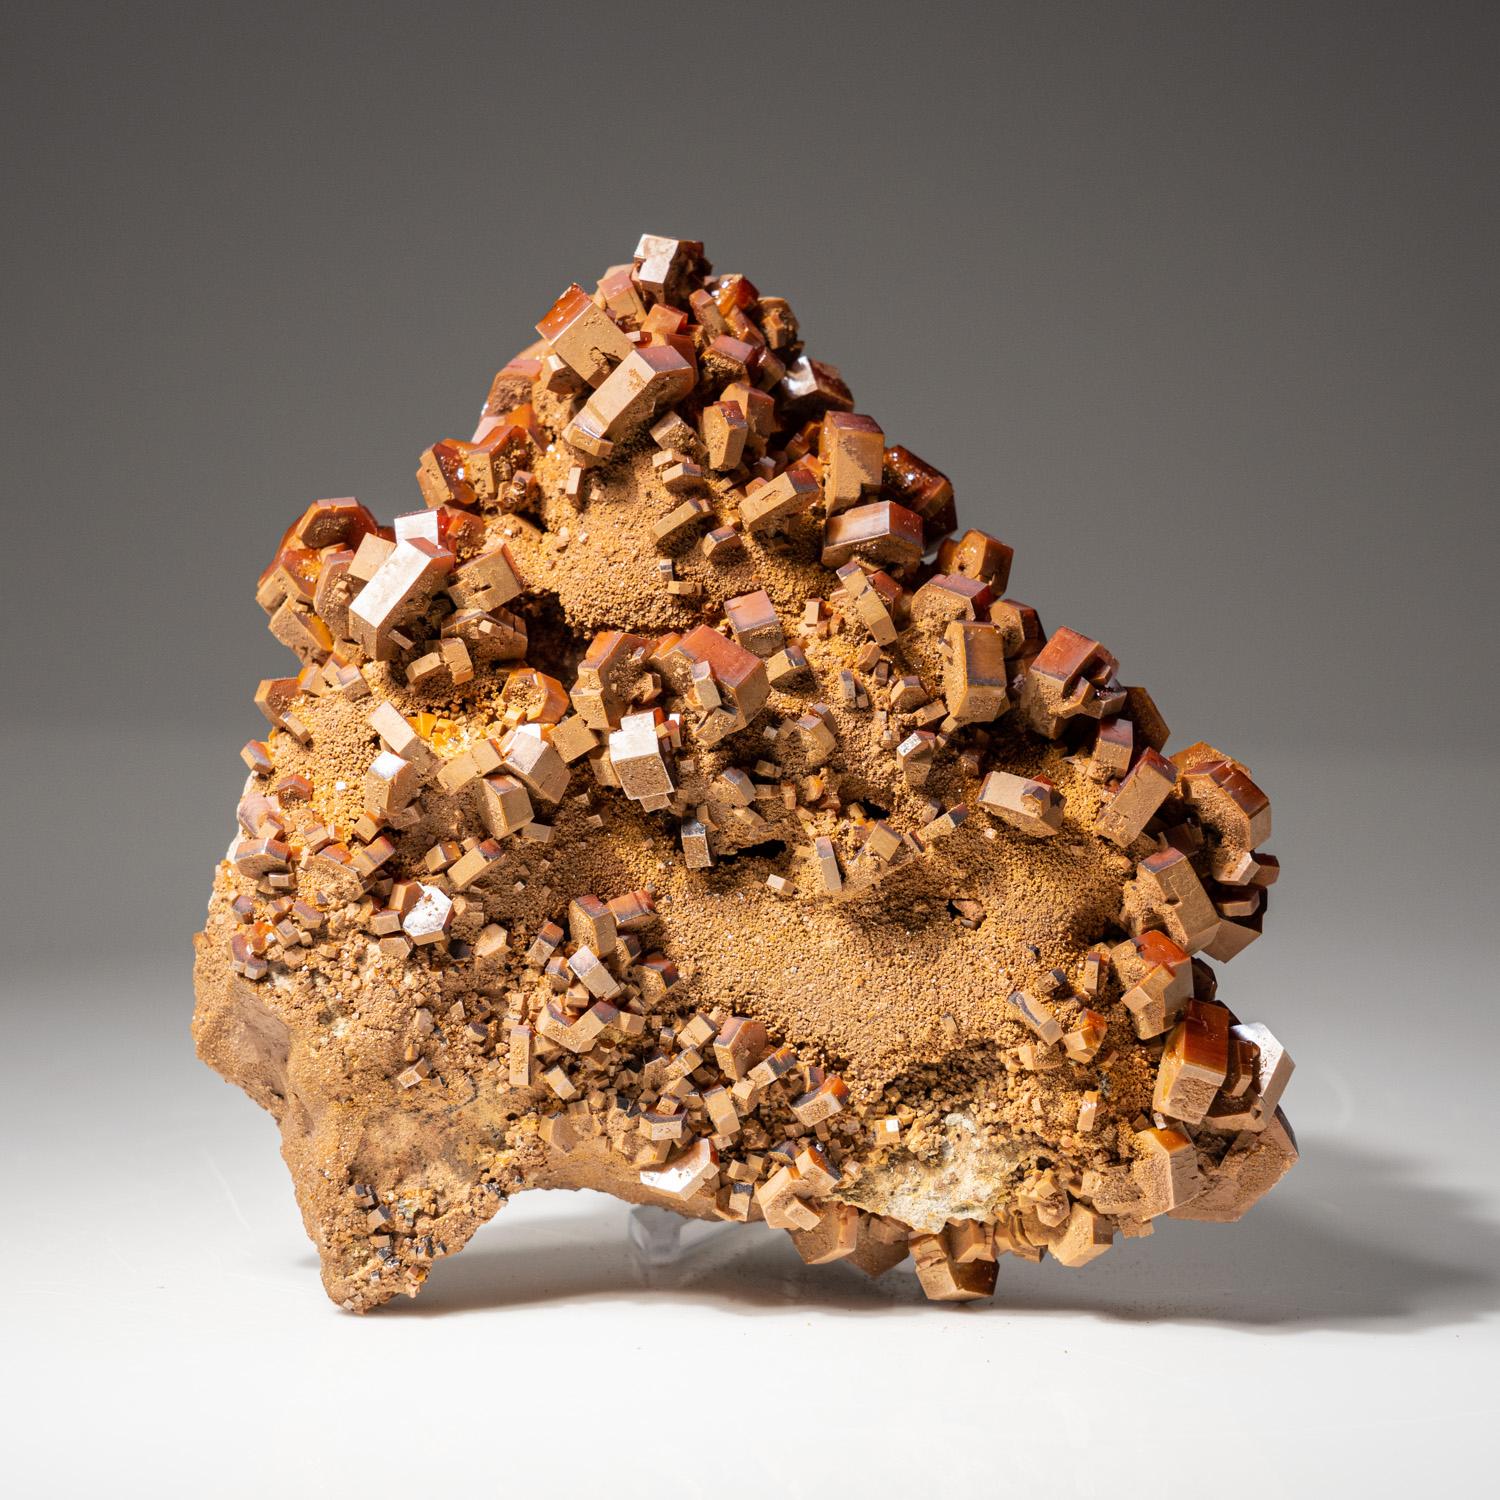 Moroccan Genuine Vanadinite Crystal Cluster on Matrix from Morocco (410.7 grams) For Sale